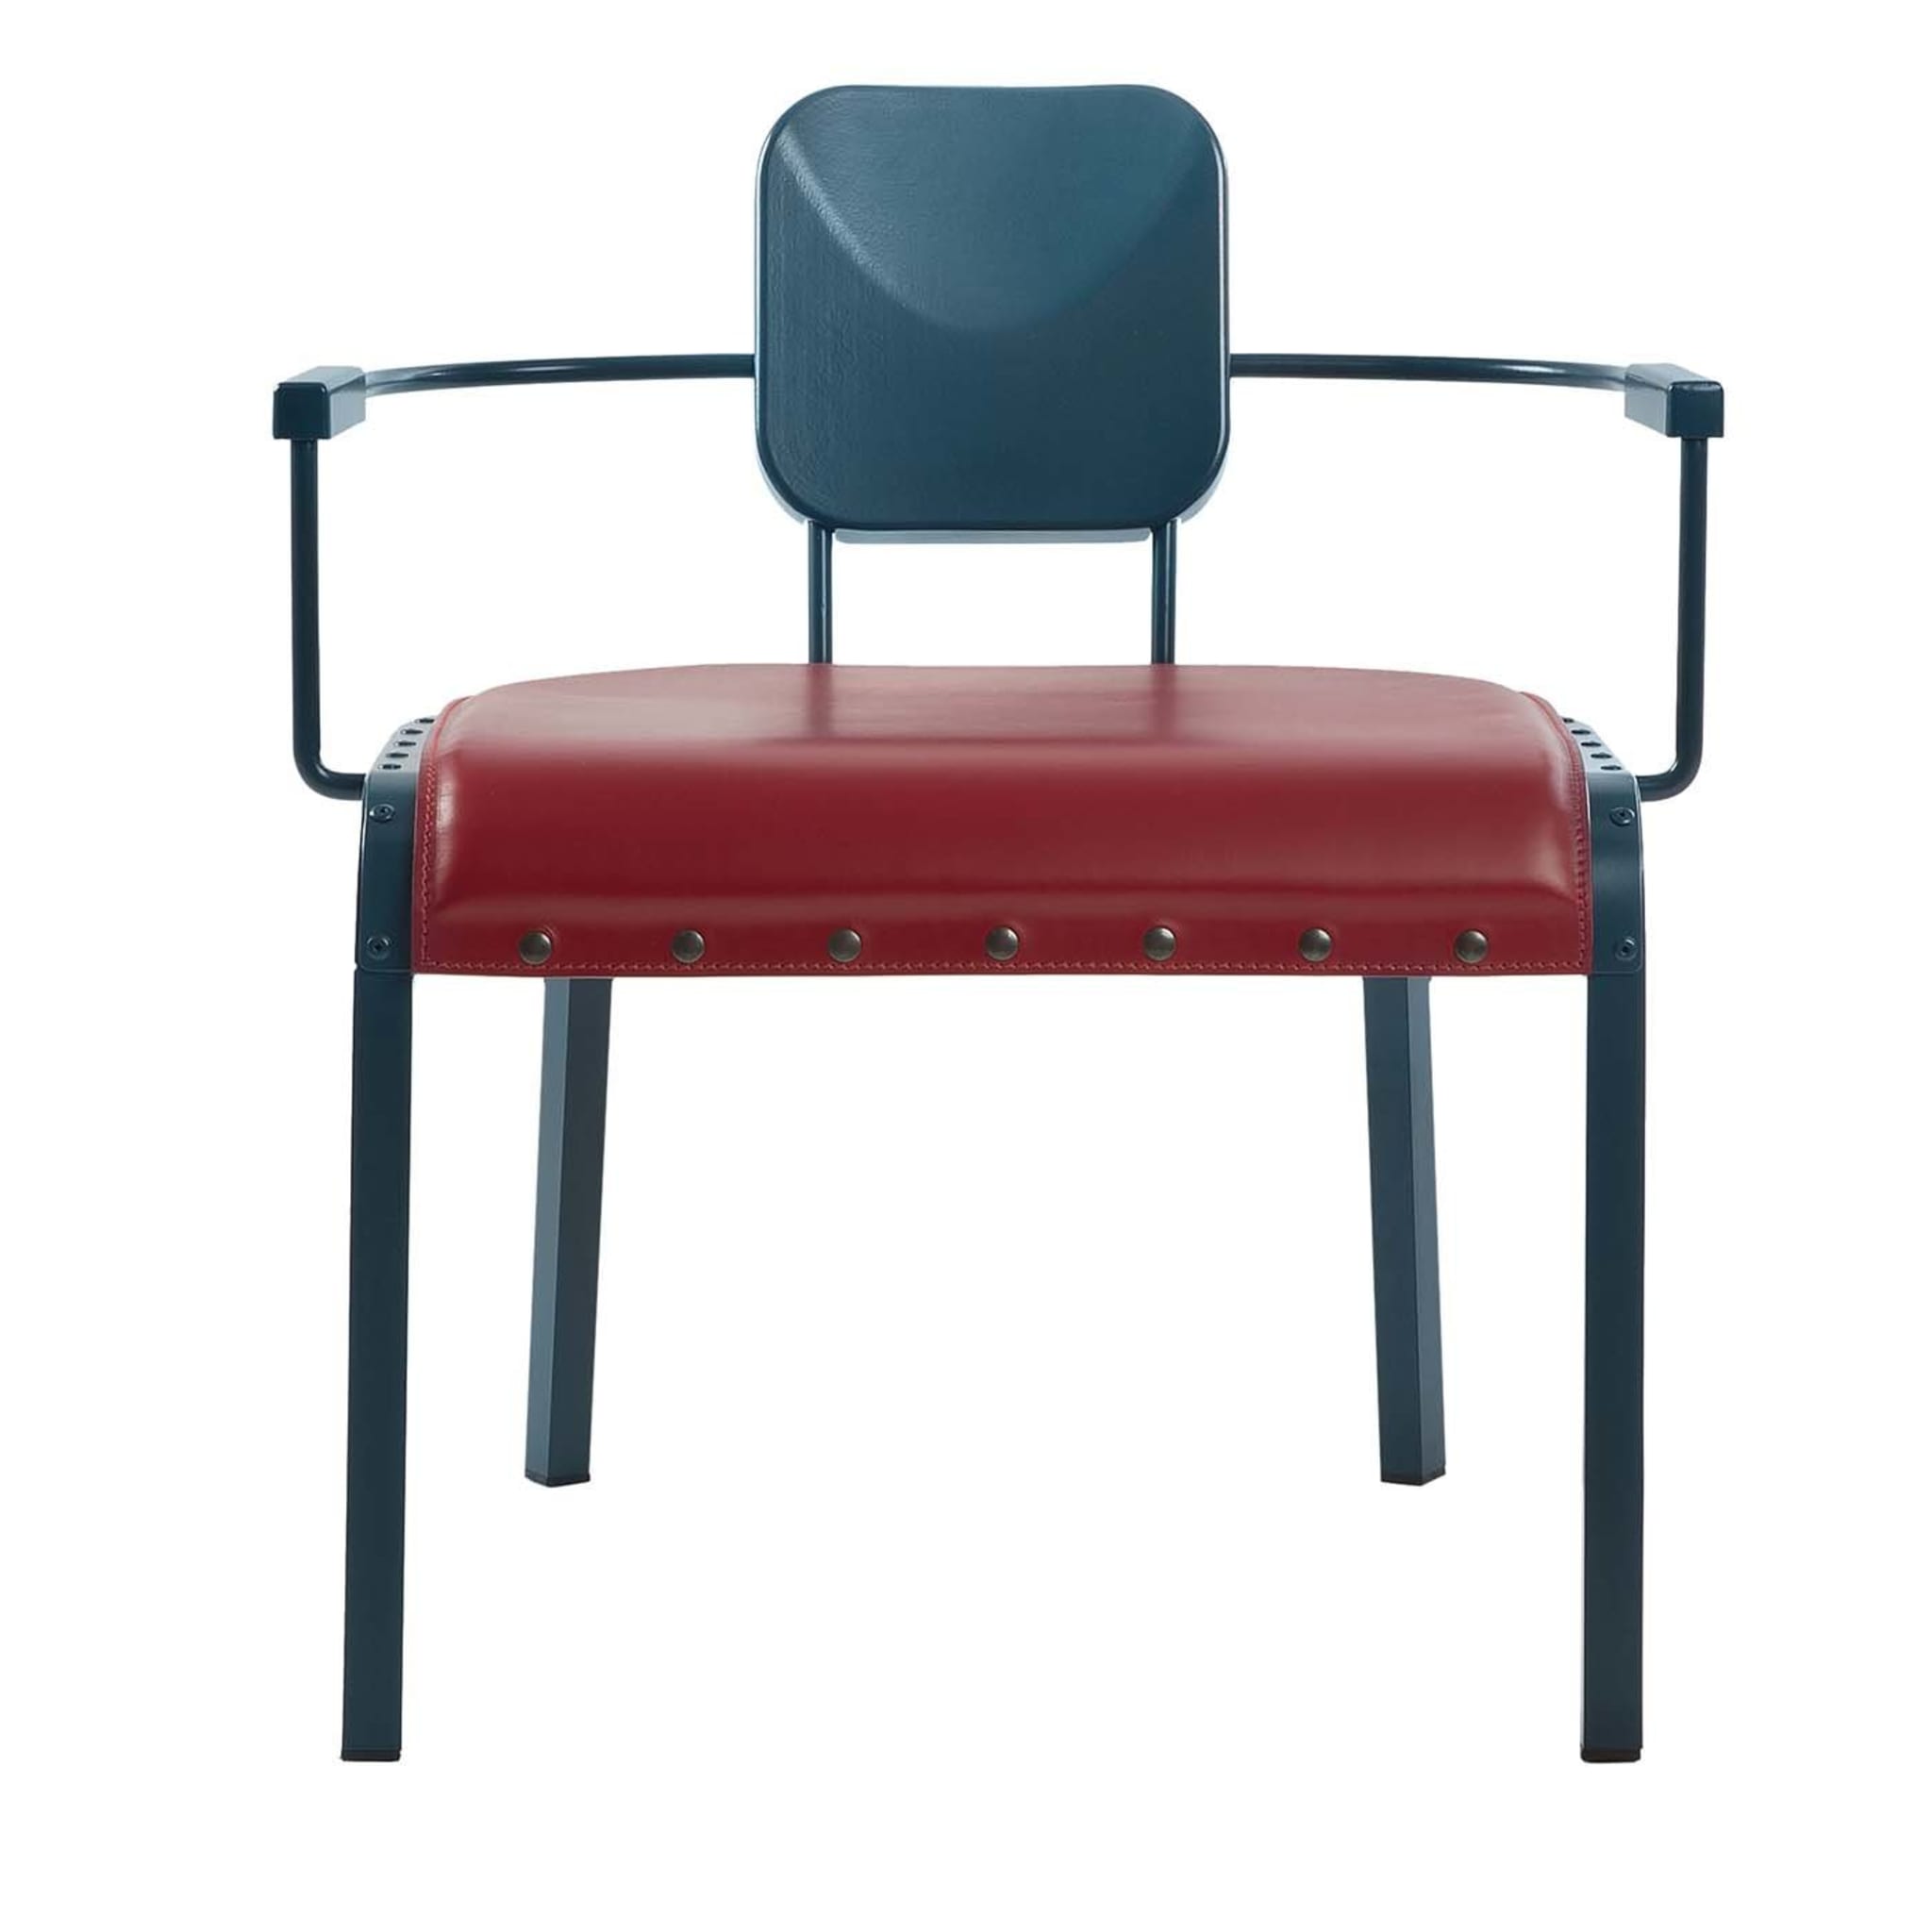 Rock4 Blue Lounge Armchair with Red Leather Seat by Marc Sadler - Main view